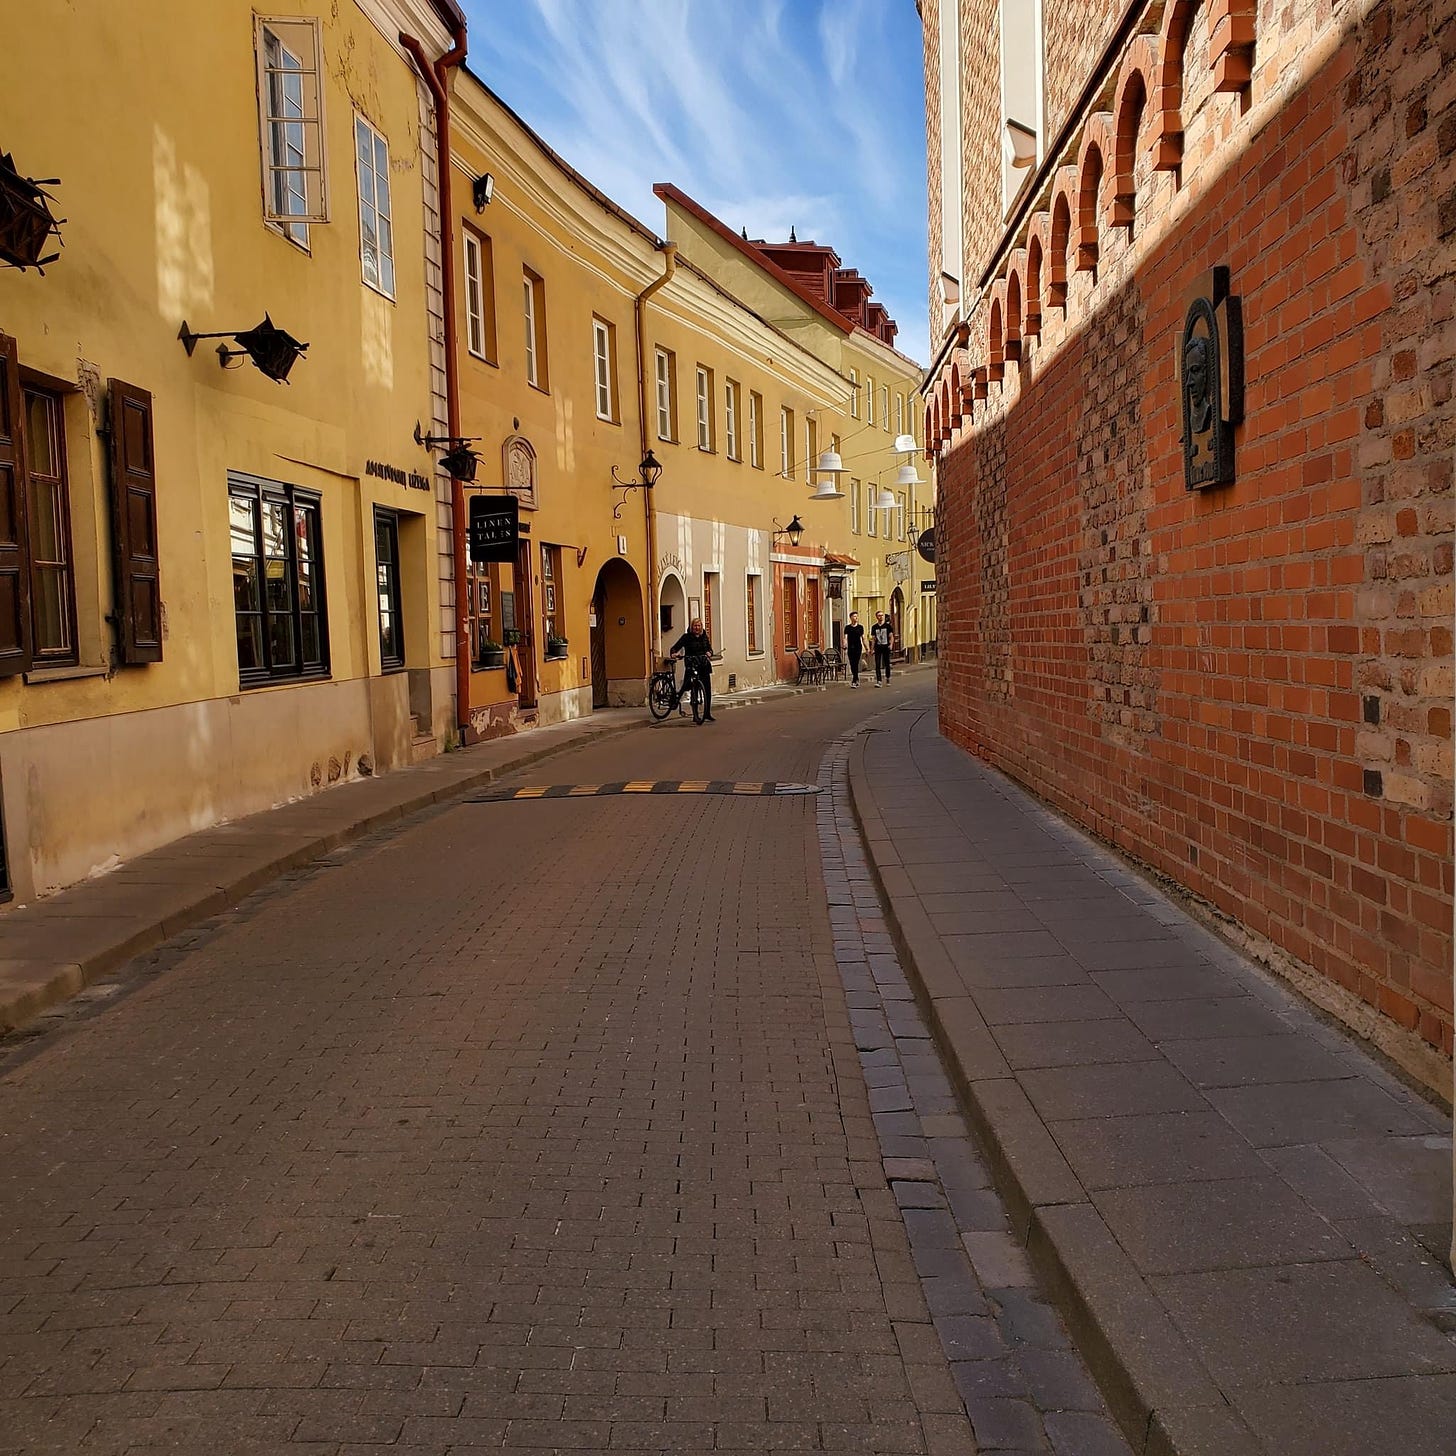 Brick and plaster buildings in the European style line a curved cobblestone street.